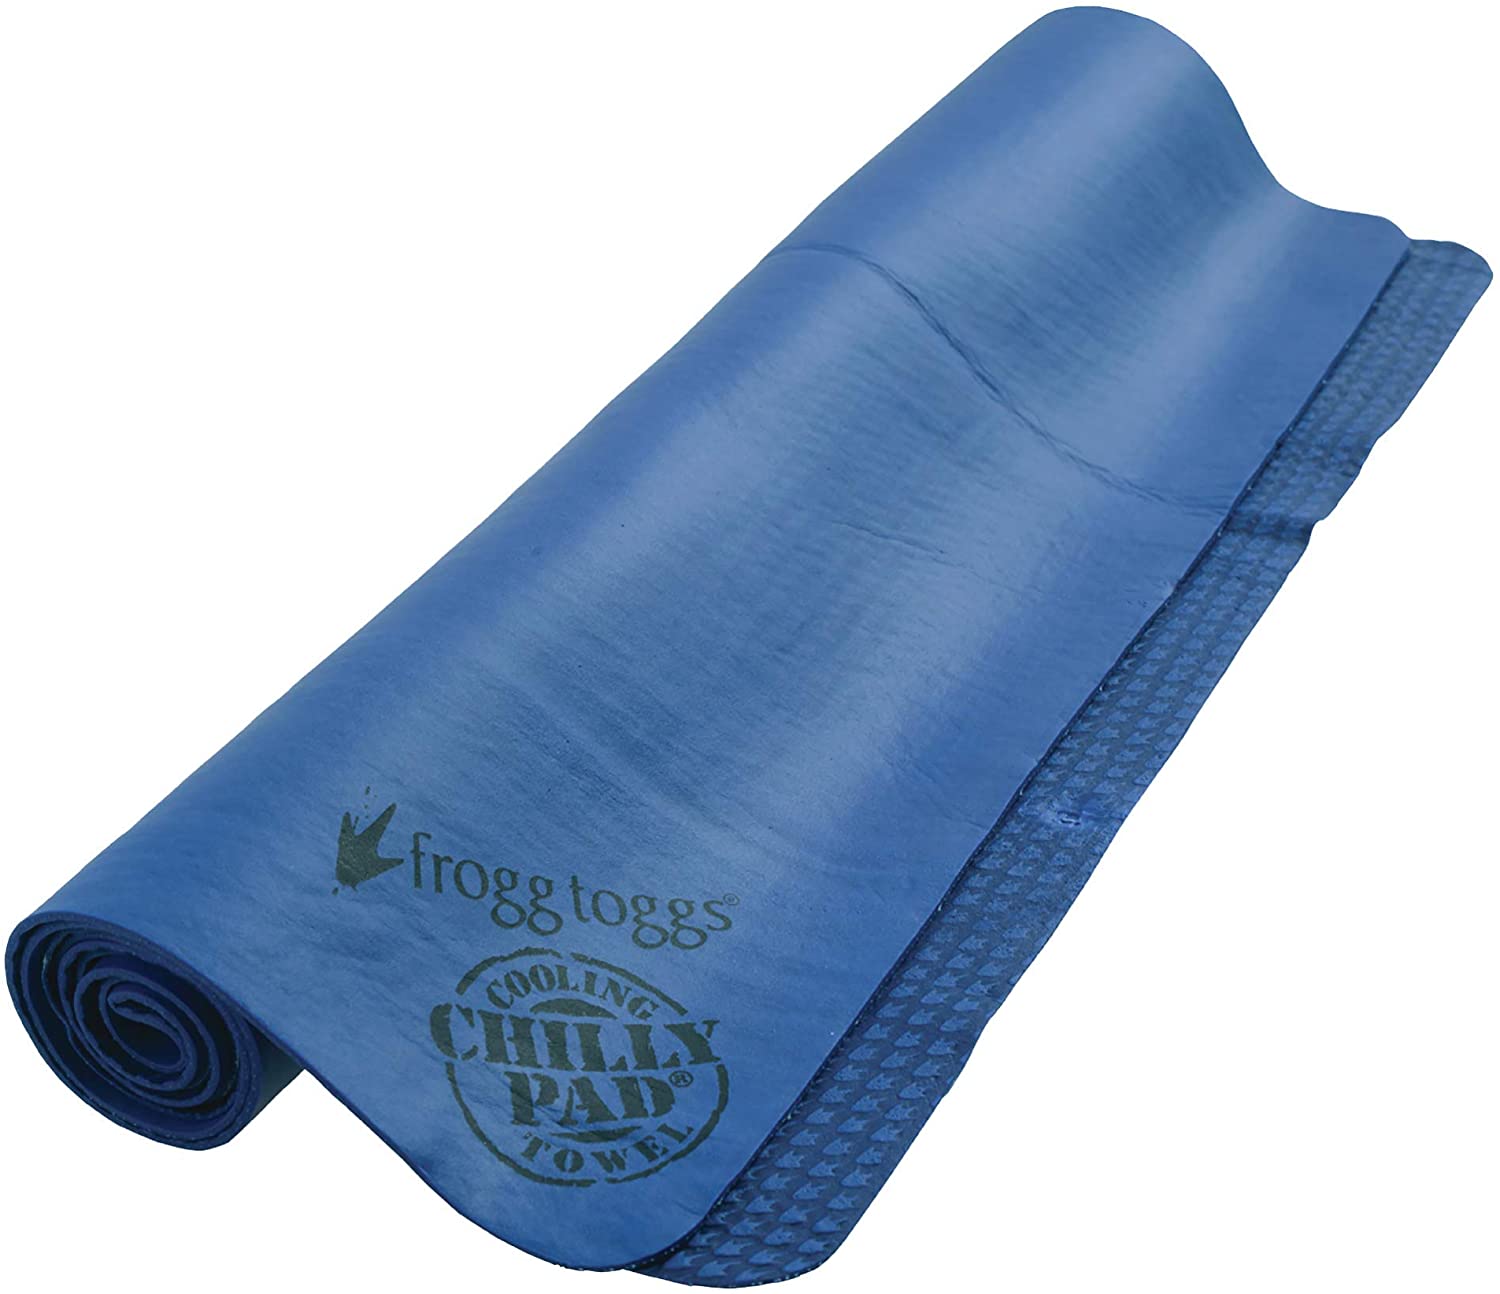 Details about   Frogg Toggs 33" x 13" The Original Chilly Pad Cooling Towel Choice of Color 